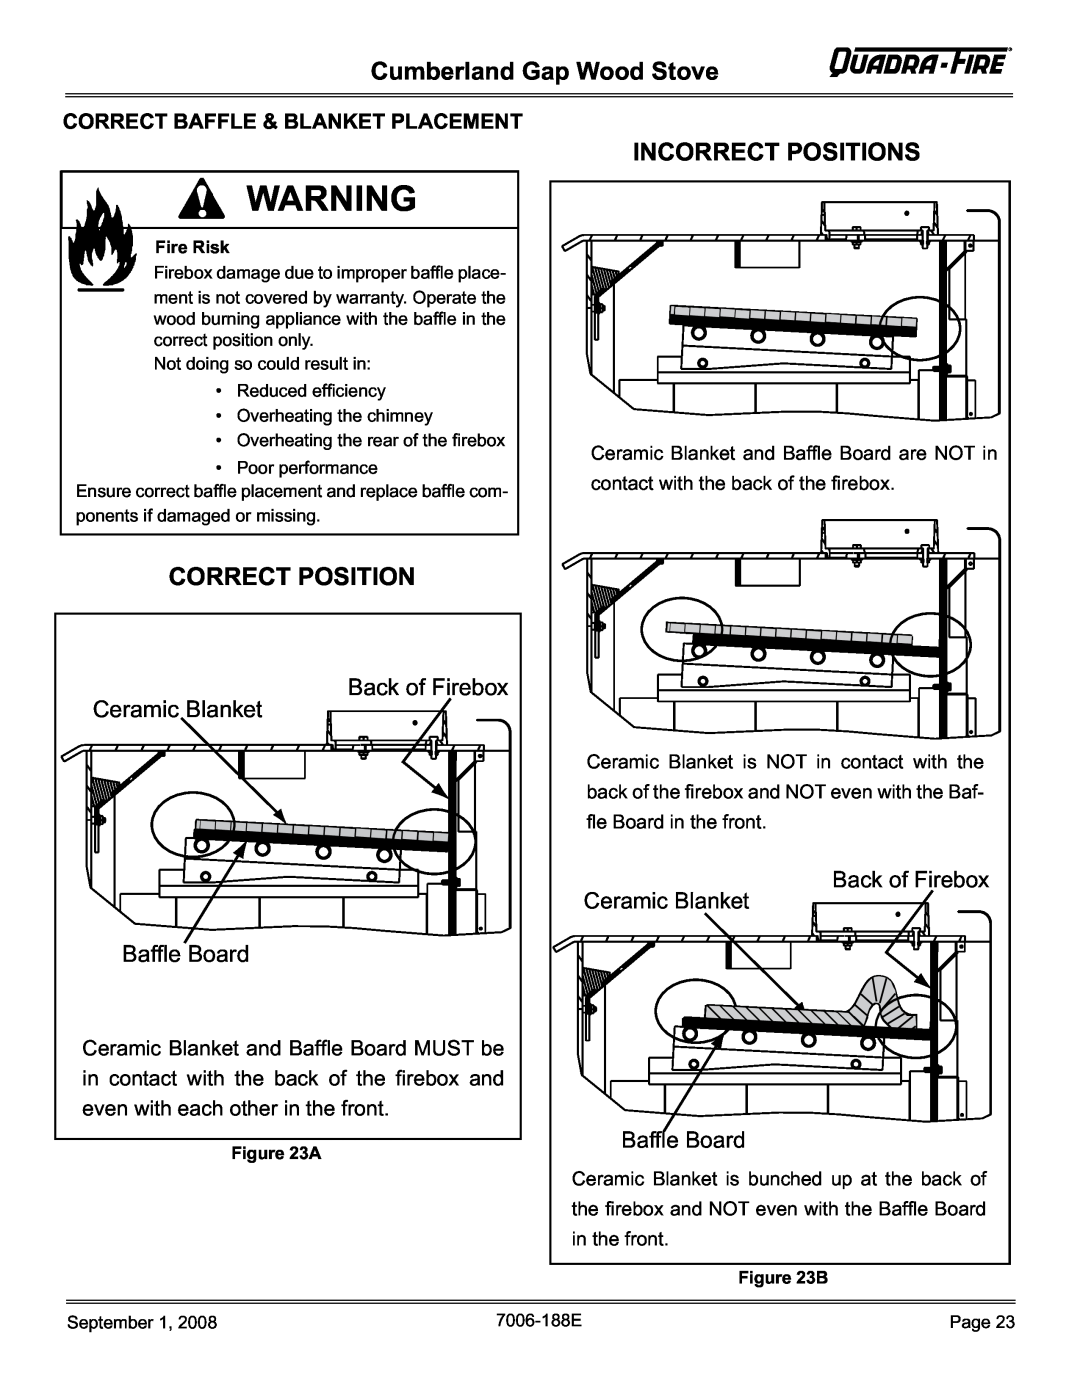 Hearth and Home Technologies CUMBGAP-PMH Incorrect Positions, Correct Position, Correct Baffle & Blanket Placement 